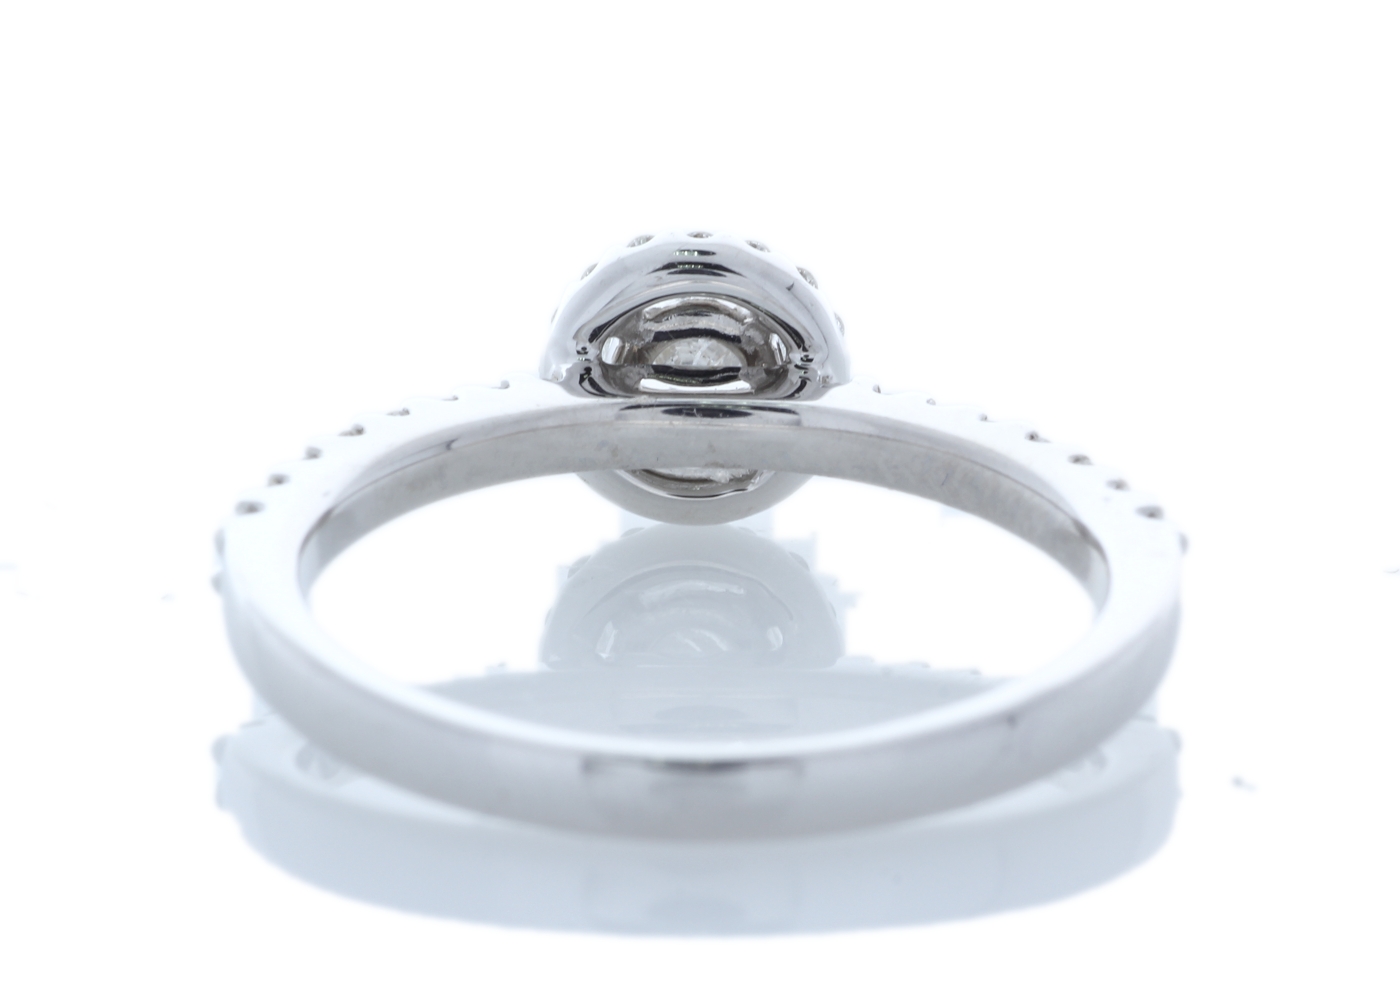 18ct White Gold Single Stone With Halo Setting Ring (0.31) 0.63 Carats - Image 3 of 5